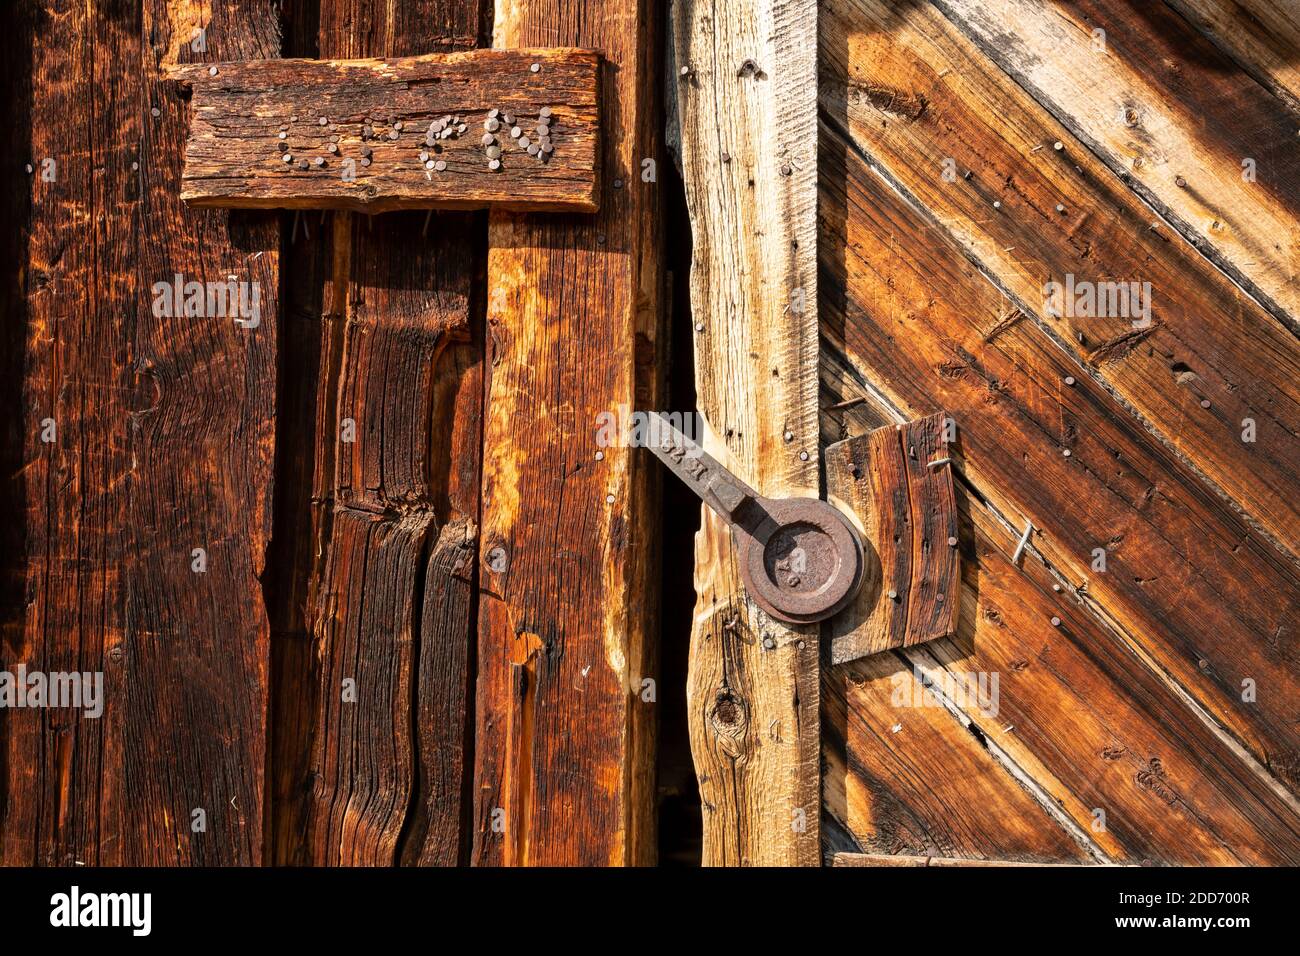 WA18504-00...WASHINGTON - The door of the historic Tungsten Mine located along the Boundary Trail in the Pasayten Wilderness area. Stock Photo